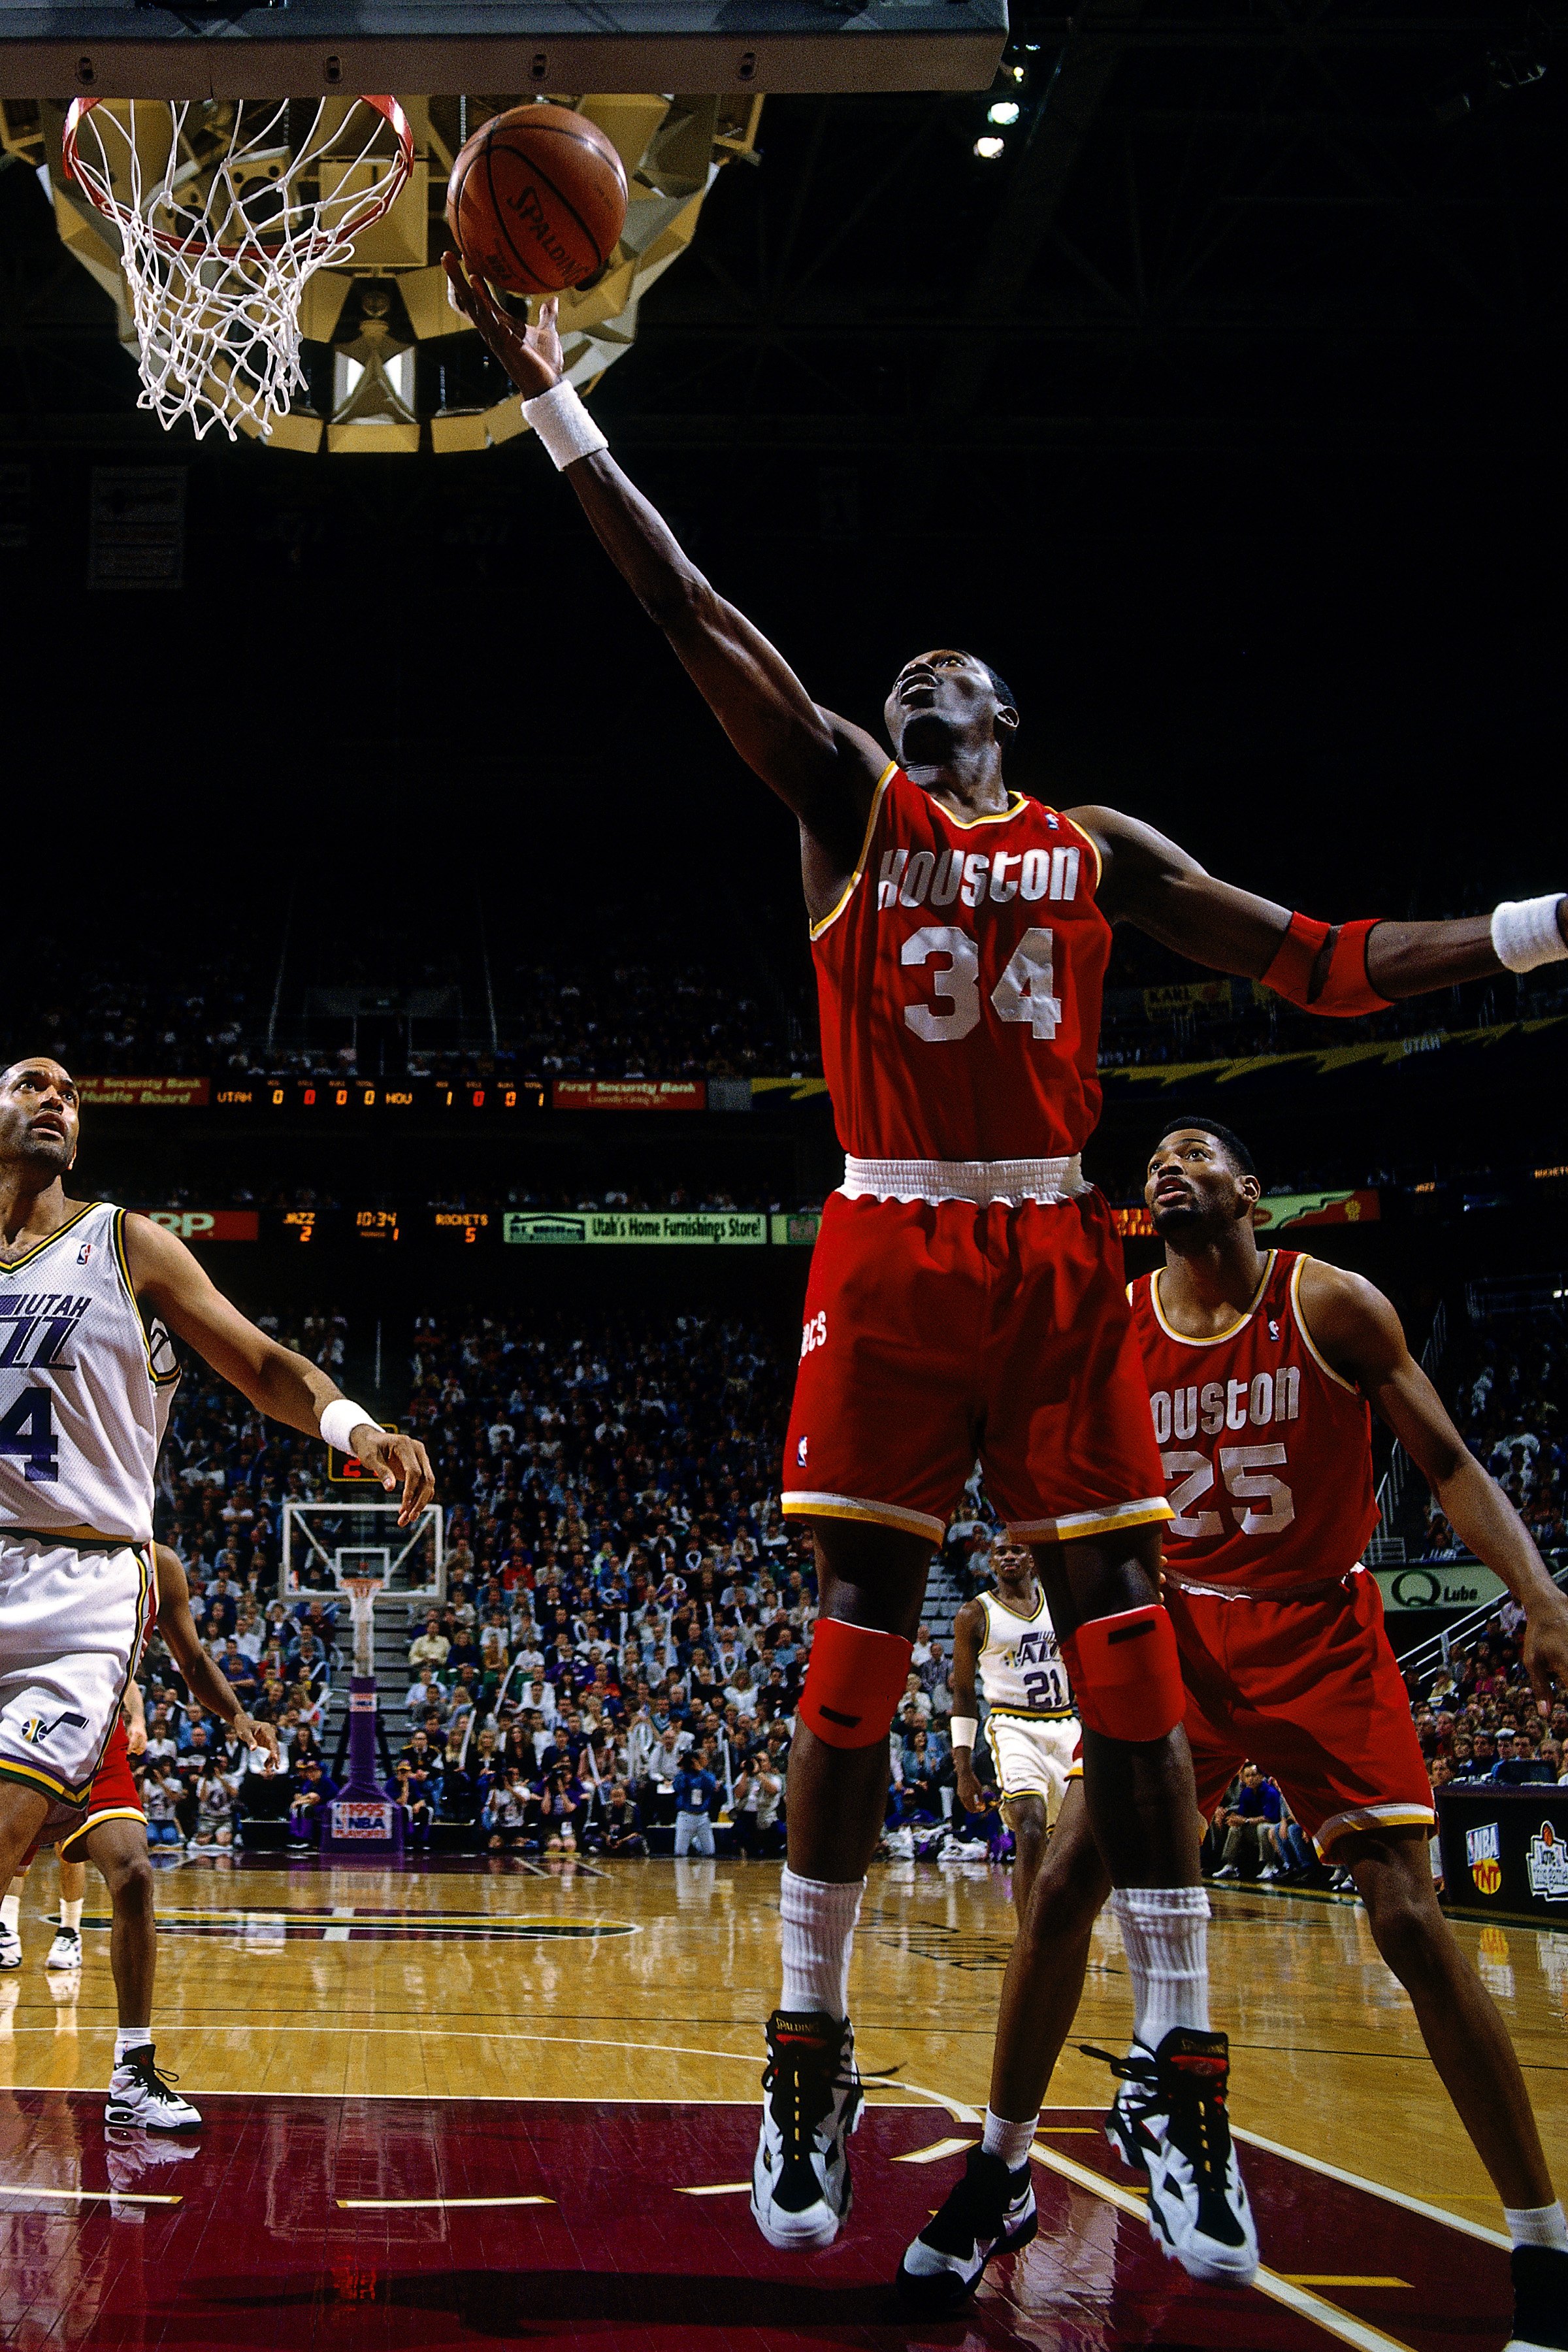 Back in time: The Houston Rockets' 1995 Championship team2400 x 3600